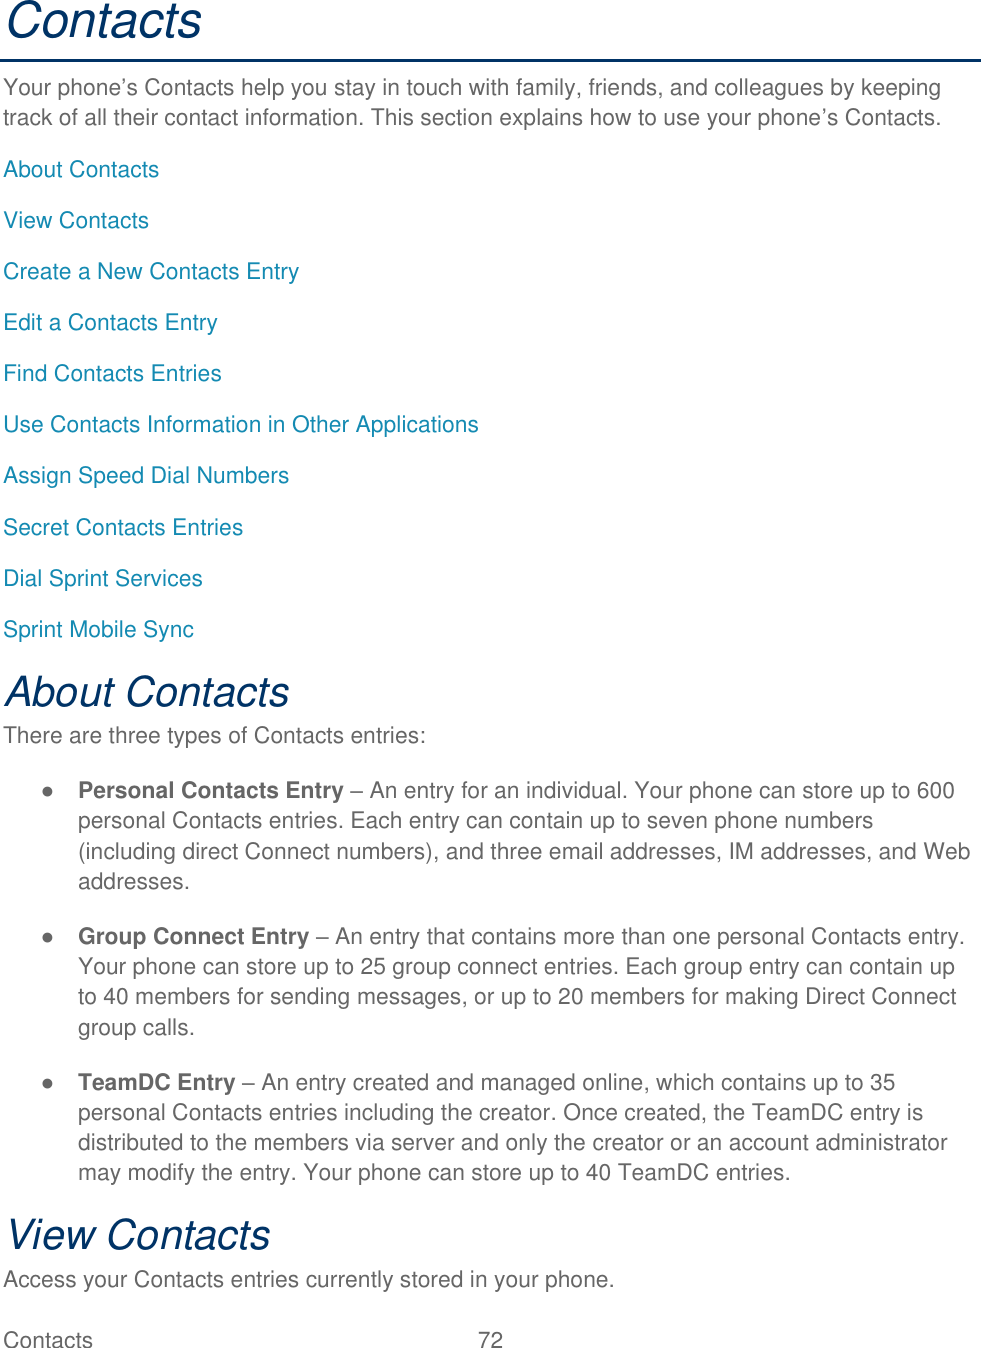  Contacts   72   Contacts Your phone’s Contacts help you stay in touch with family, friends, and colleagues by keeping track of all their contact information. This section explains how to use your phone’s Contacts. About Contacts View Contacts Create a New Contacts Entry Edit a Contacts Entry Find Contacts Entries Use Contacts Information in Other Applications Assign Speed Dial Numbers Secret Contacts Entries Dial Sprint Services Sprint Mobile Sync About Contacts There are three types of Contacts entries: ● Personal Contacts Entry – An entry for an individual. Your phone can store up to 600 personal Contacts entries. Each entry can contain up to seven phone numbers (including direct Connect numbers), and three email addresses, IM addresses, and Web addresses. ● Group Connect Entry – An entry that contains more than one personal Contacts entry. Your phone can store up to 25 group connect entries. Each group entry can contain up to 40 members for sending messages, or up to 20 members for making Direct Connect group calls. ● TeamDC Entry – An entry created and managed online, which contains up to 35 personal Contacts entries including the creator. Once created, the TeamDC entry is distributed to the members via server and only the creator or an account administrator may modify the entry. Your phone can store up to 40 TeamDC entries. View Contacts Access your Contacts entries currently stored in your phone. 